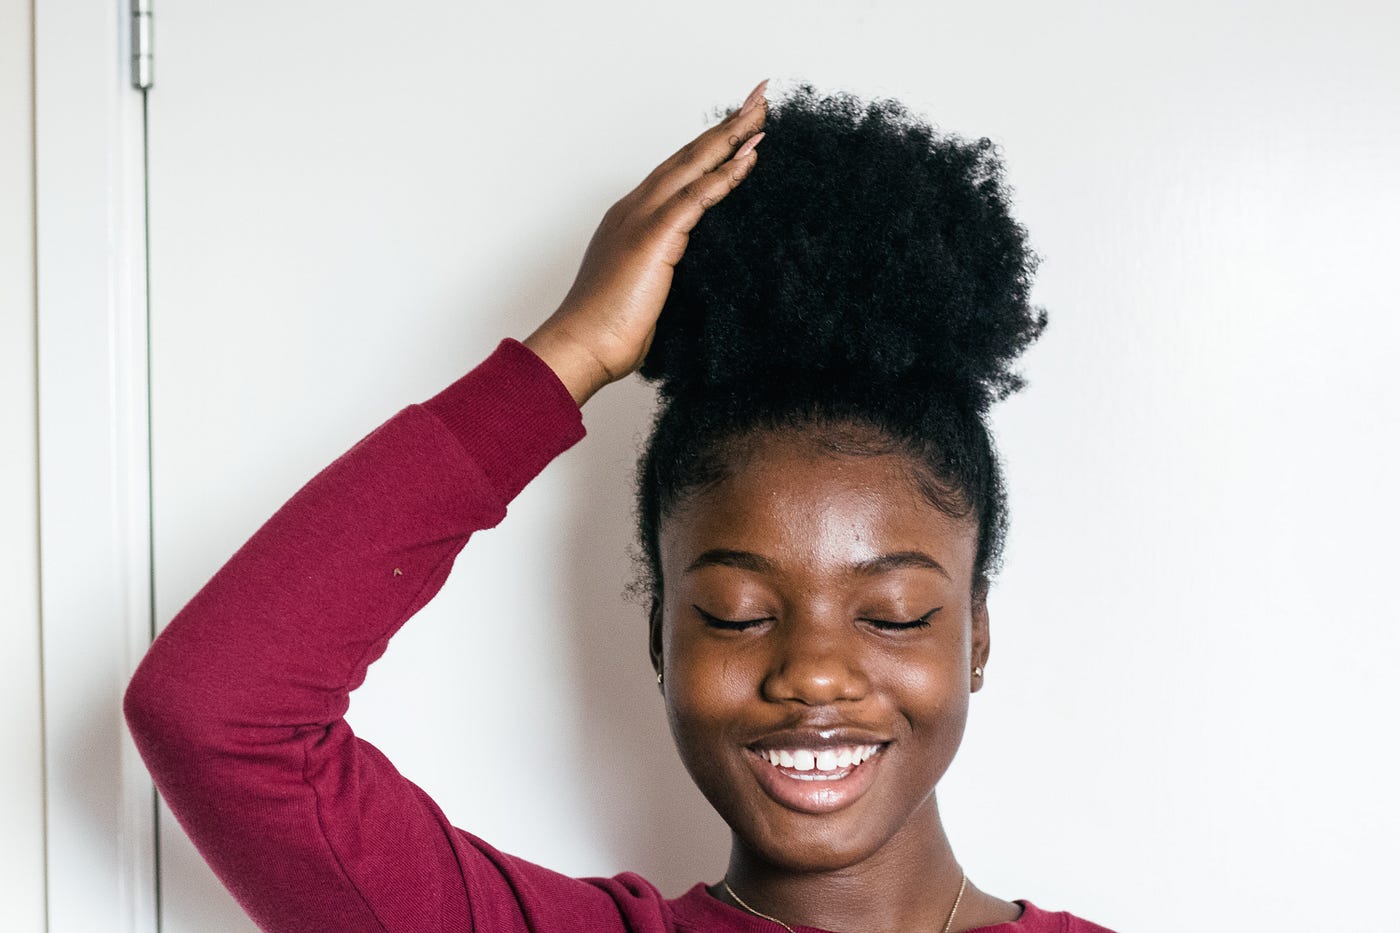 My Hair is Bomb”: Black Girls' Identities and Resistance, by National  Center for Institutional Diversity, Spark: Elevating Scholarship on Social  Issues